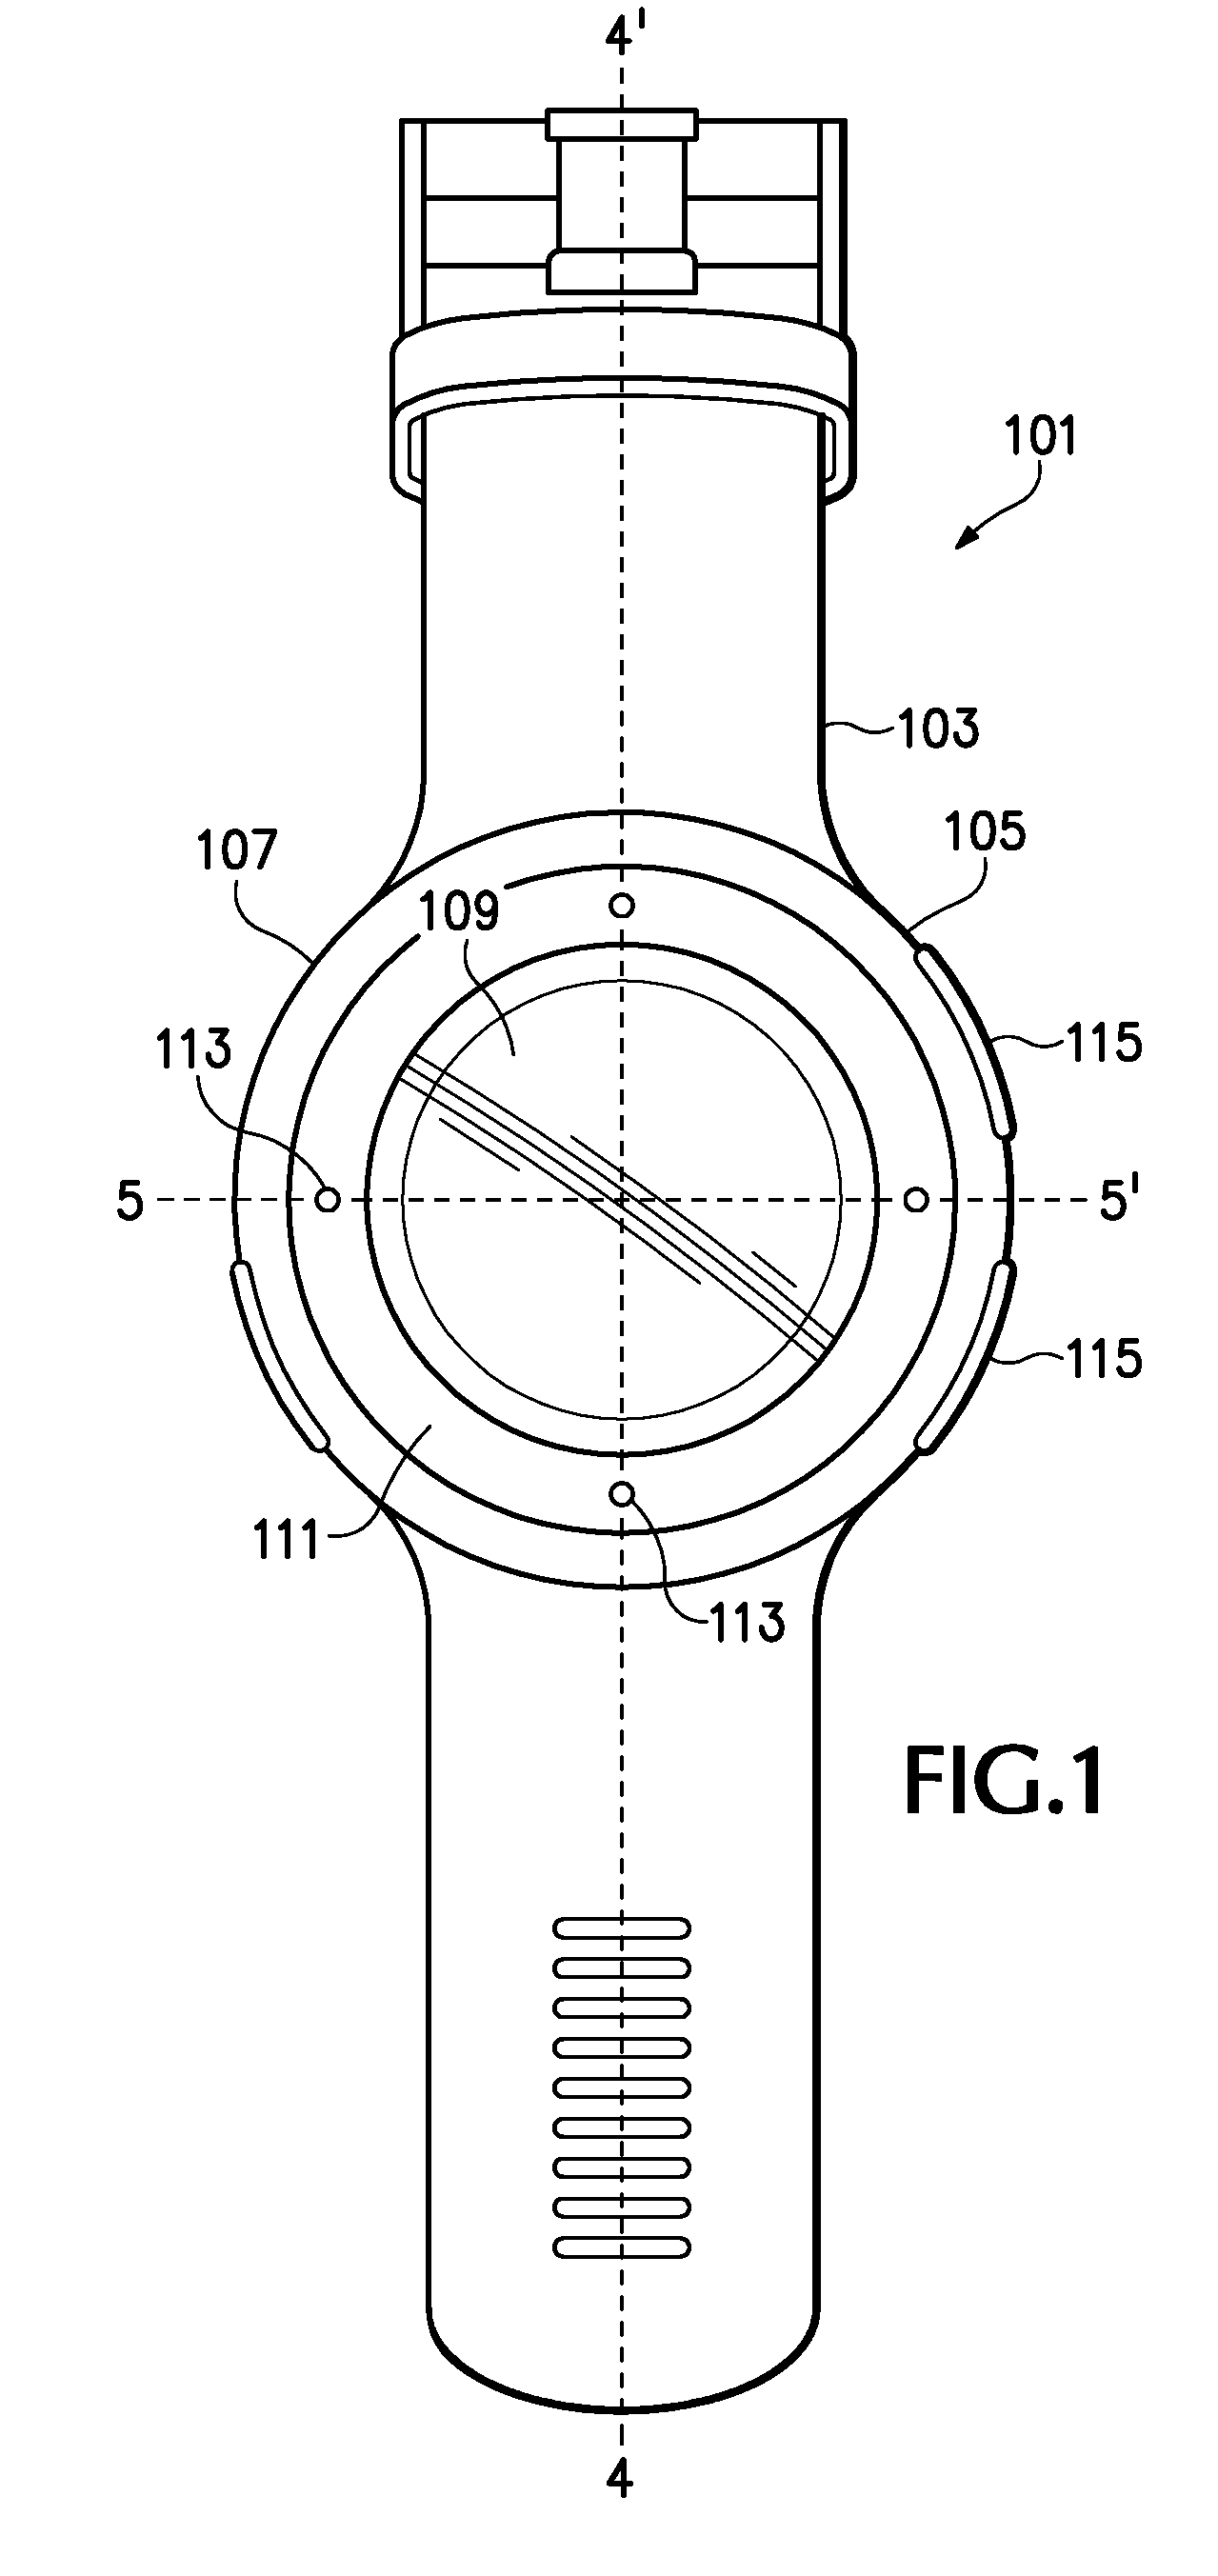 Watch casing integrally formed with watch band